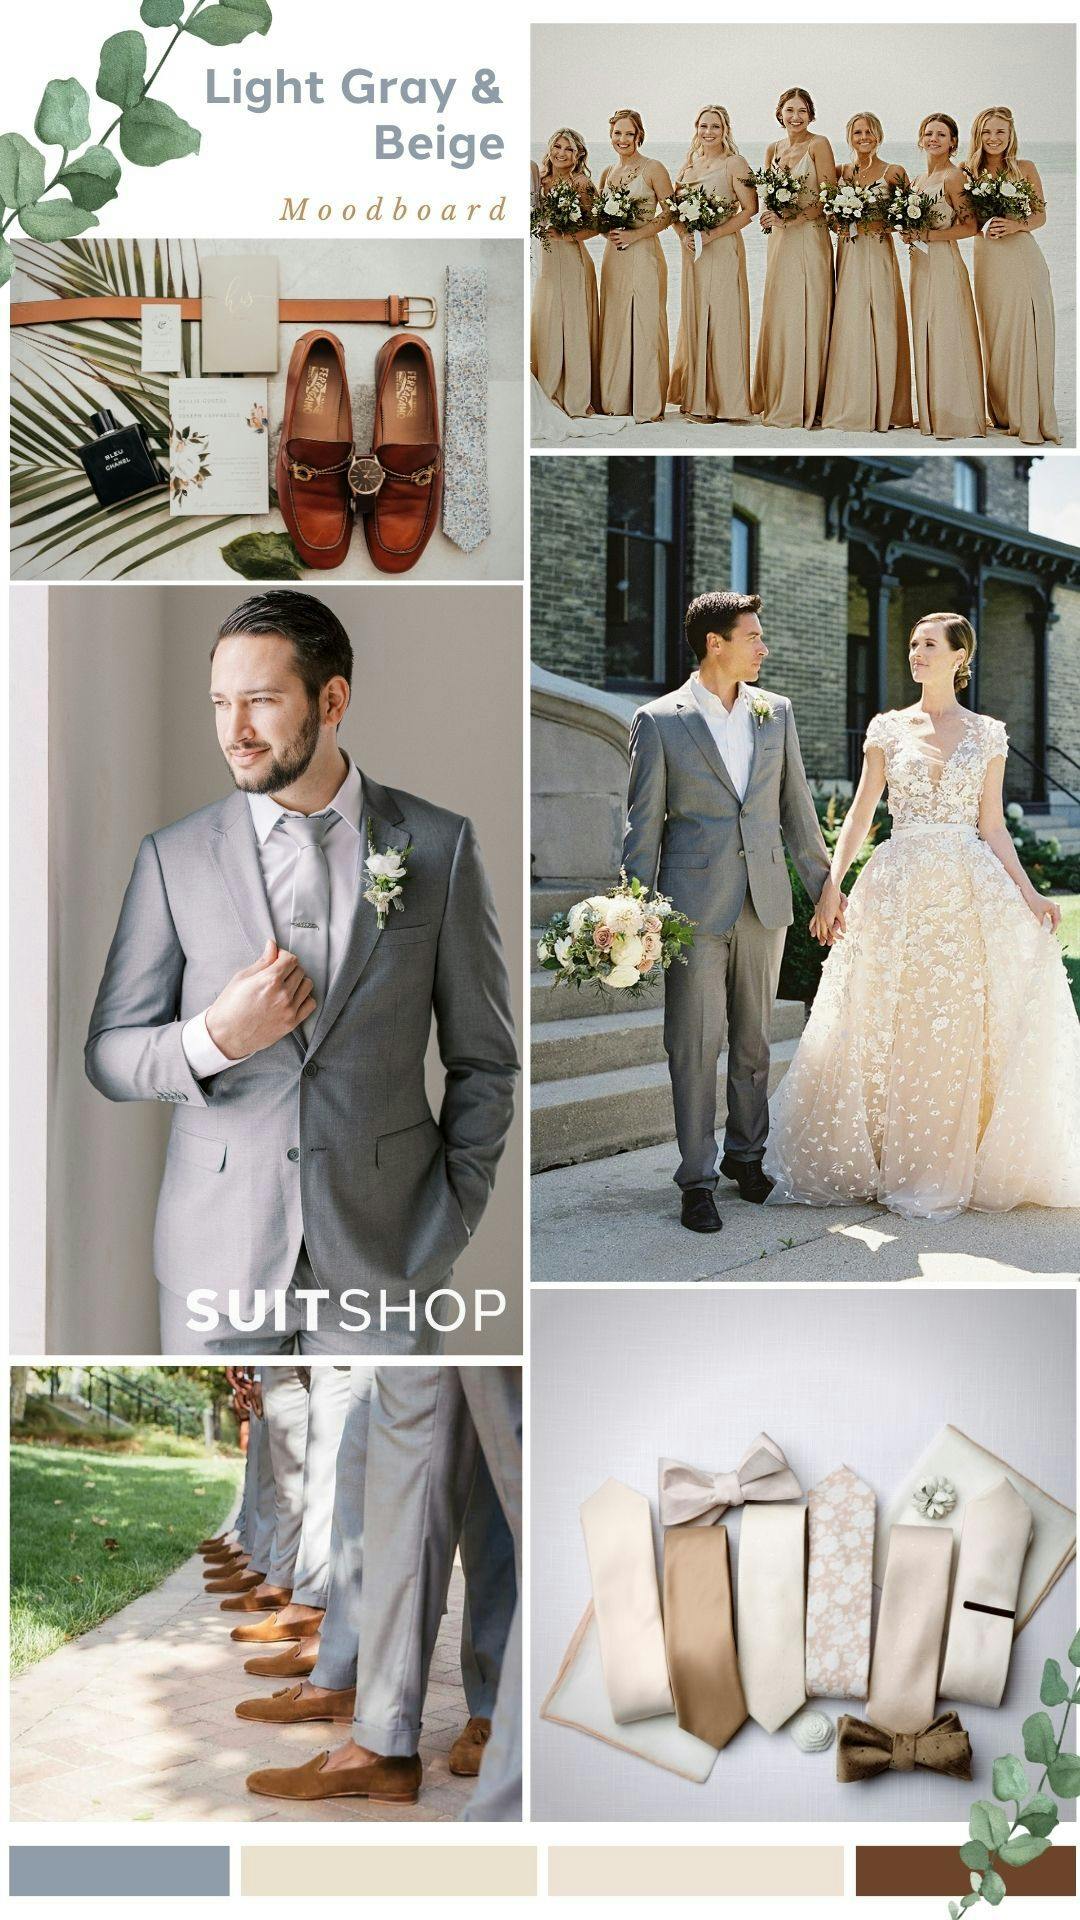 Trendy neutral wedding color mood board with champagne & beige bridesmaid dresses and ties and light gray wedding suits.